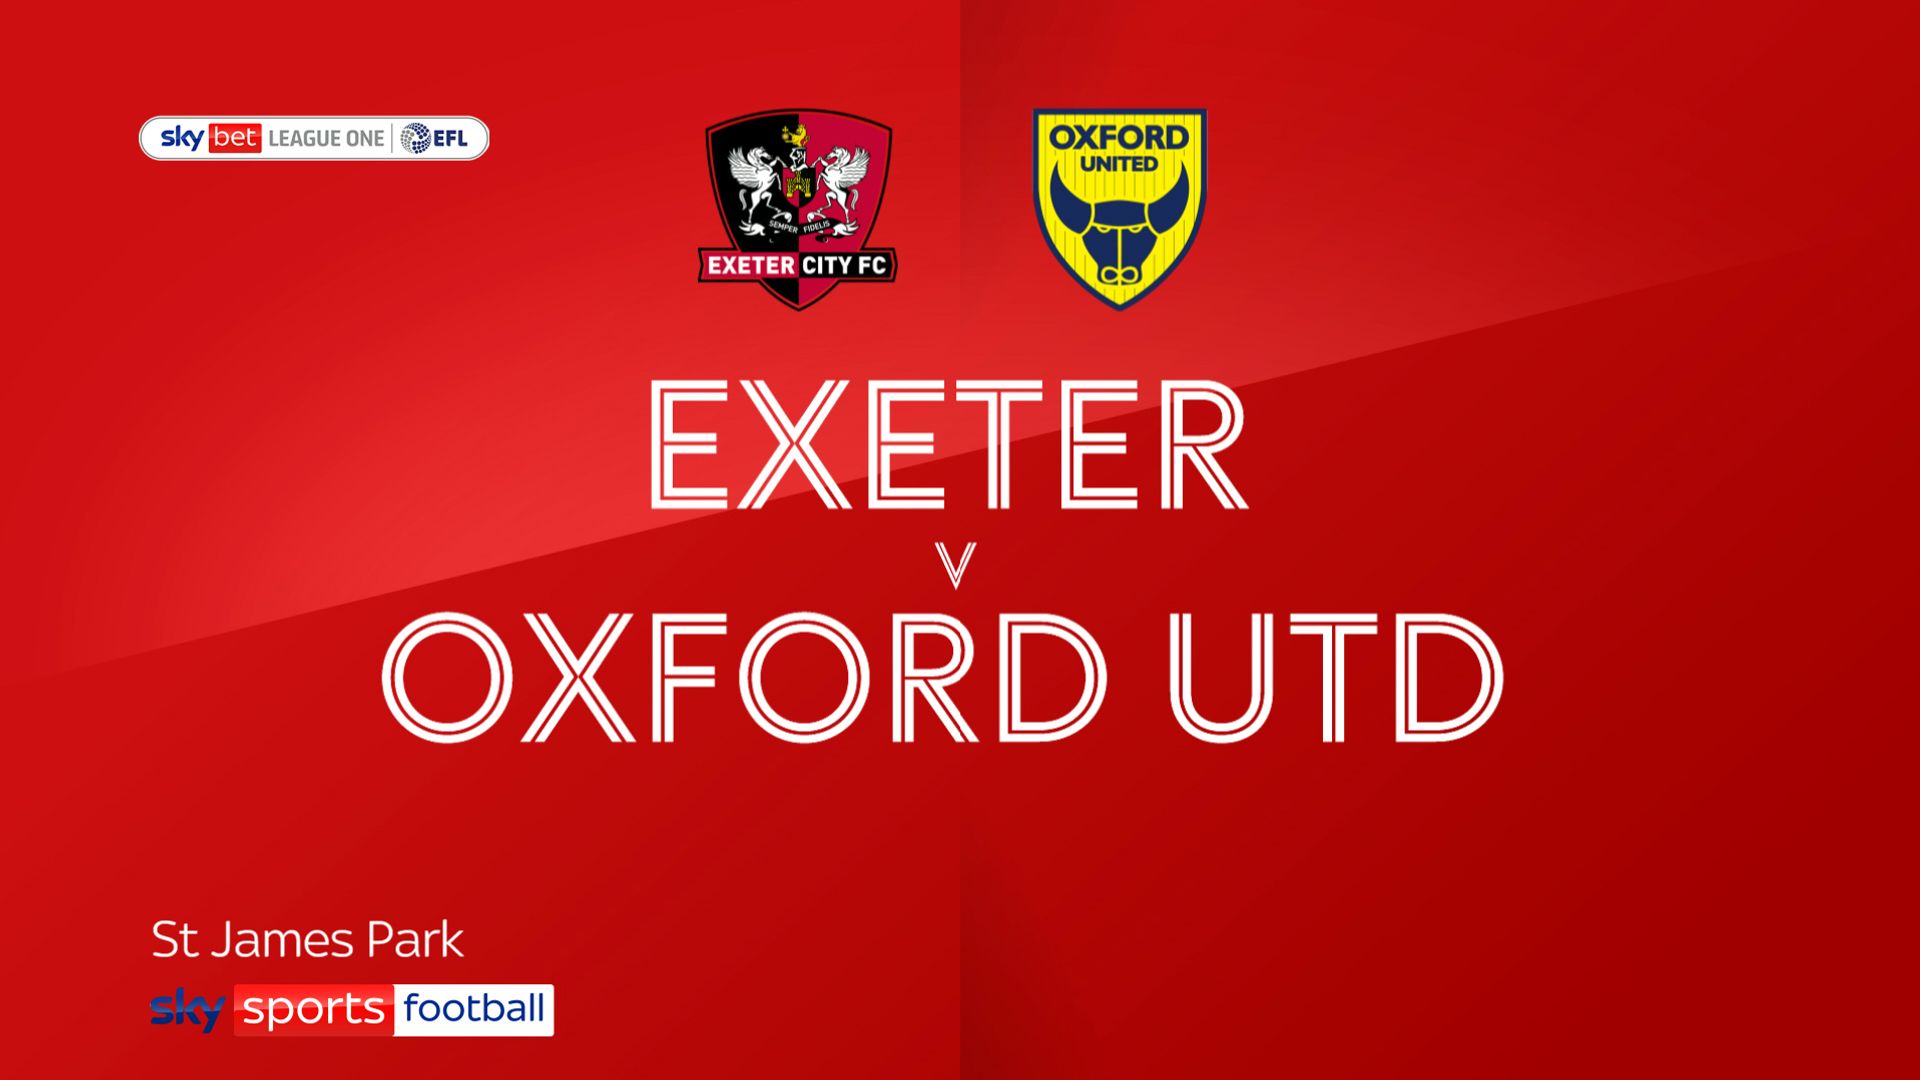 Exeter 2-4 Oxford: Kyle Joesph scores twice in emphatic United win